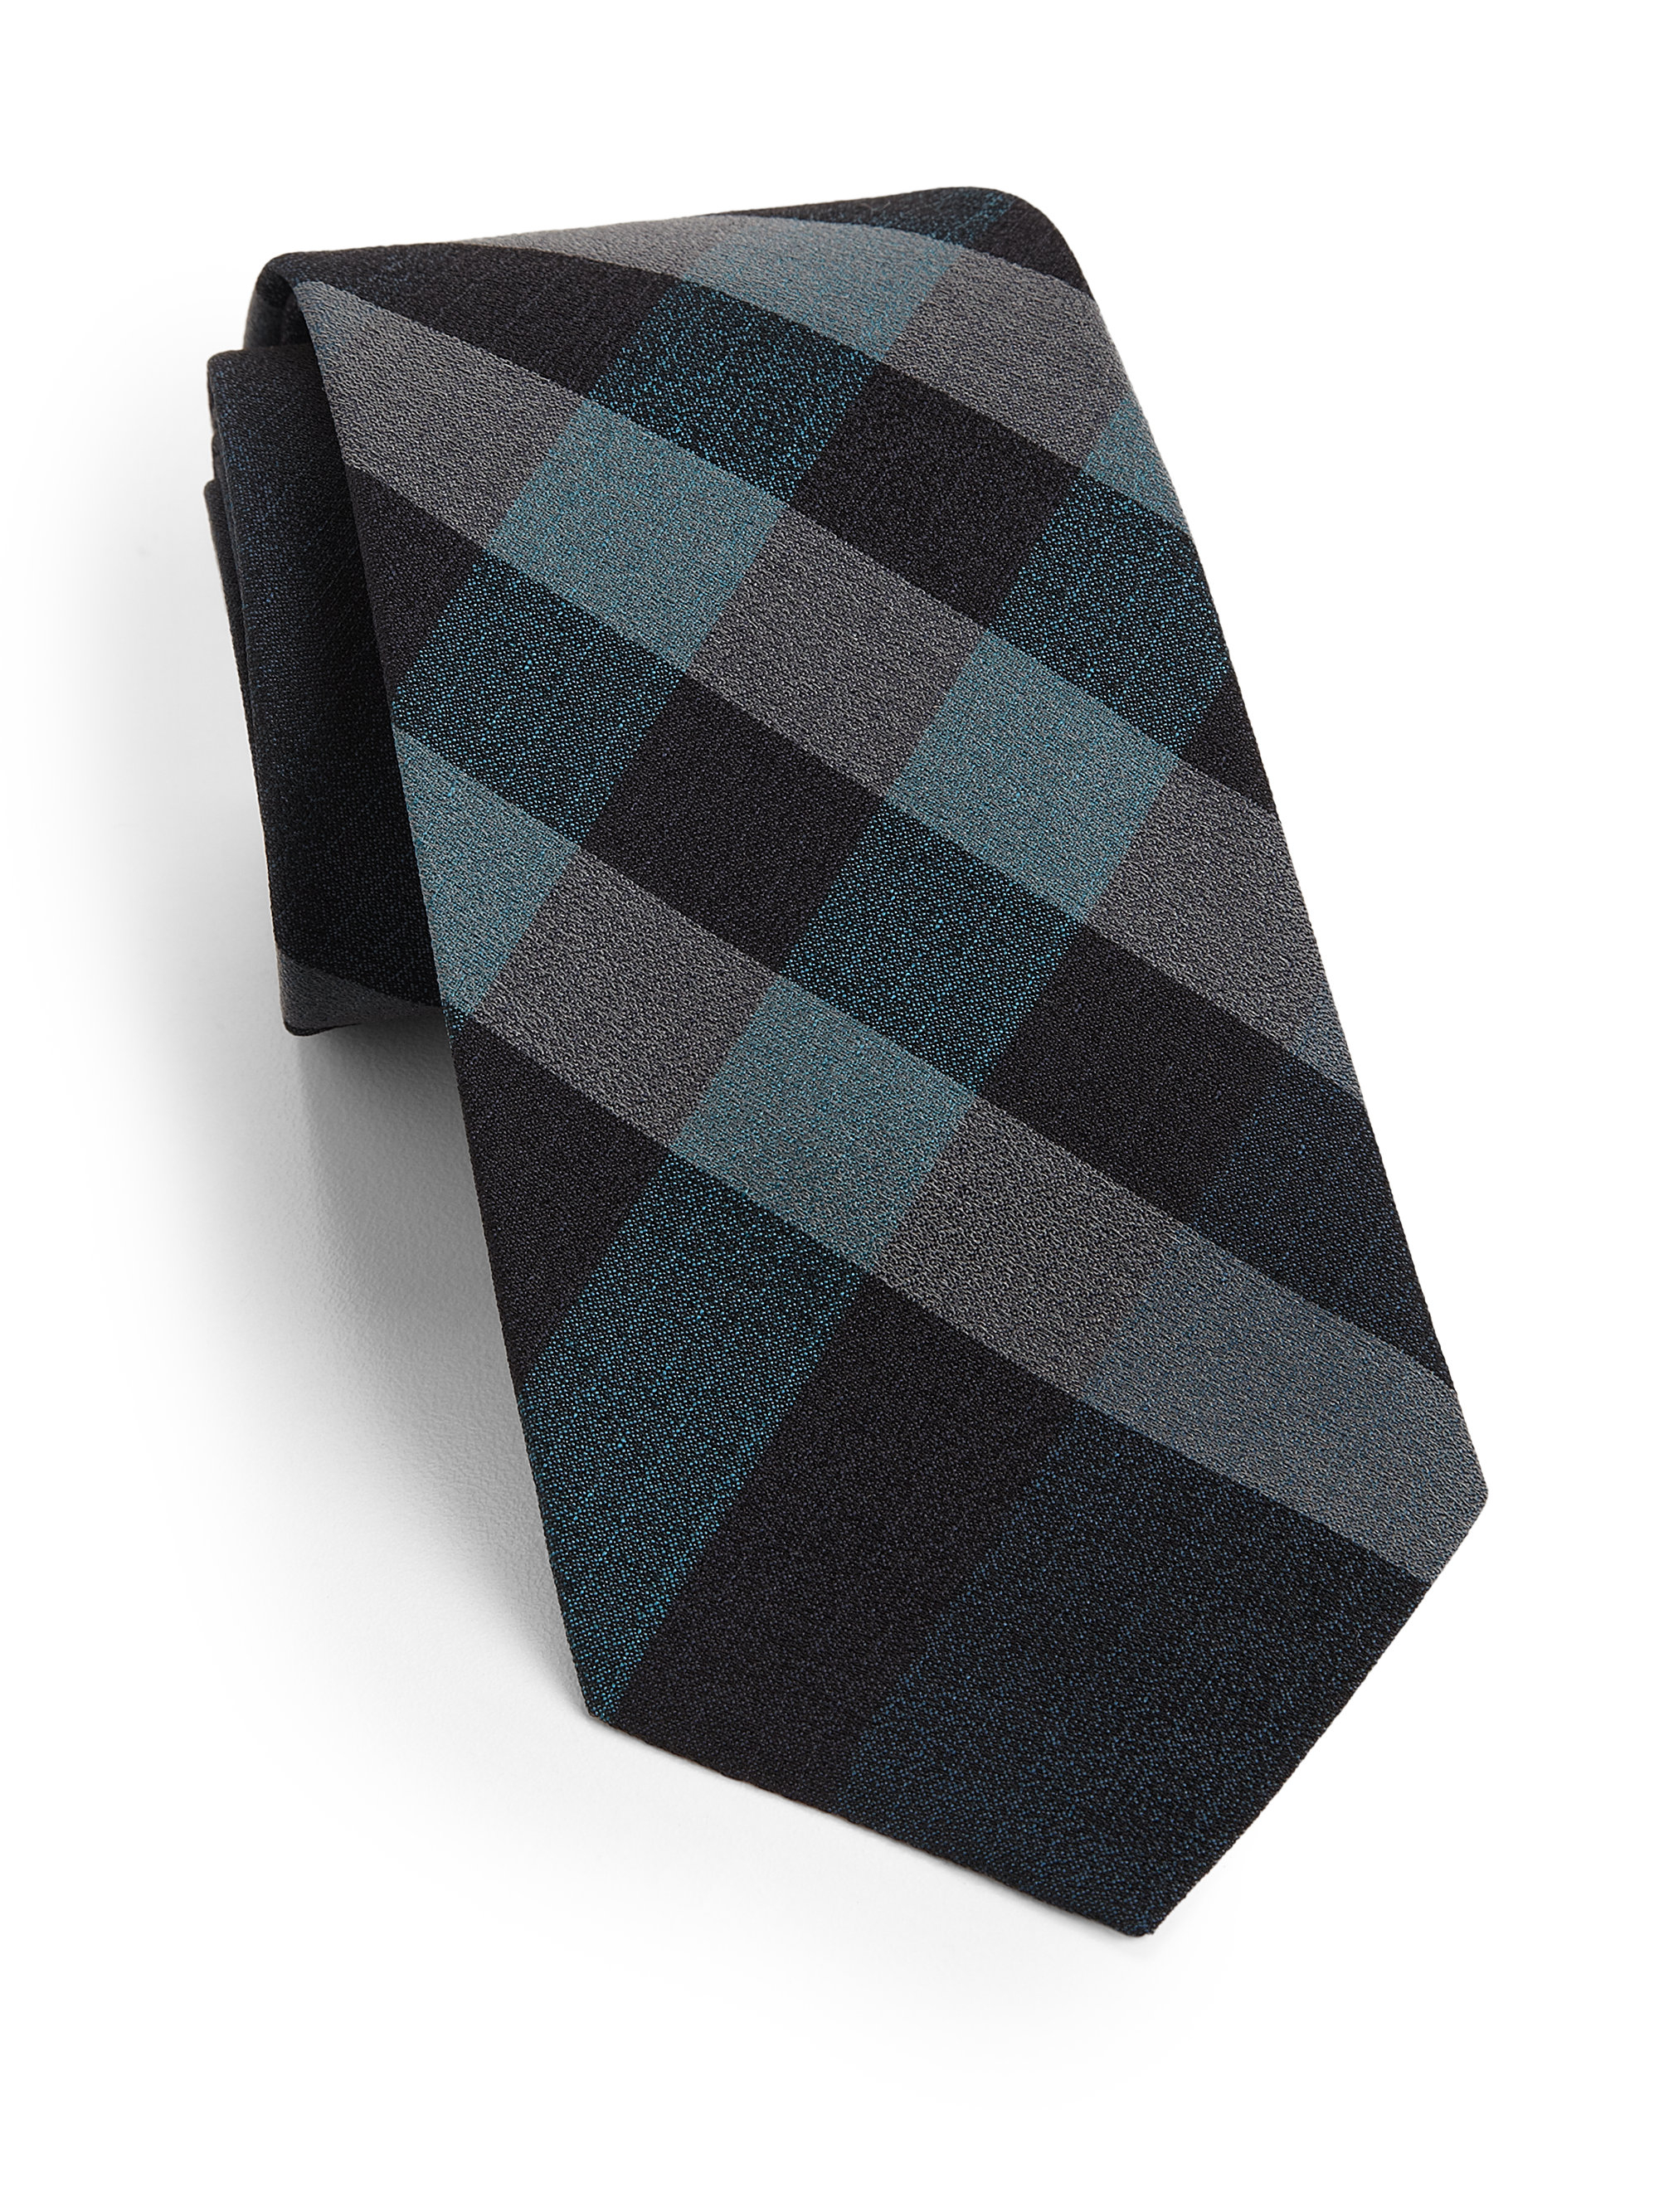 Burberry Rohan Big Check Tie in Black (Green) for Men - Lyst